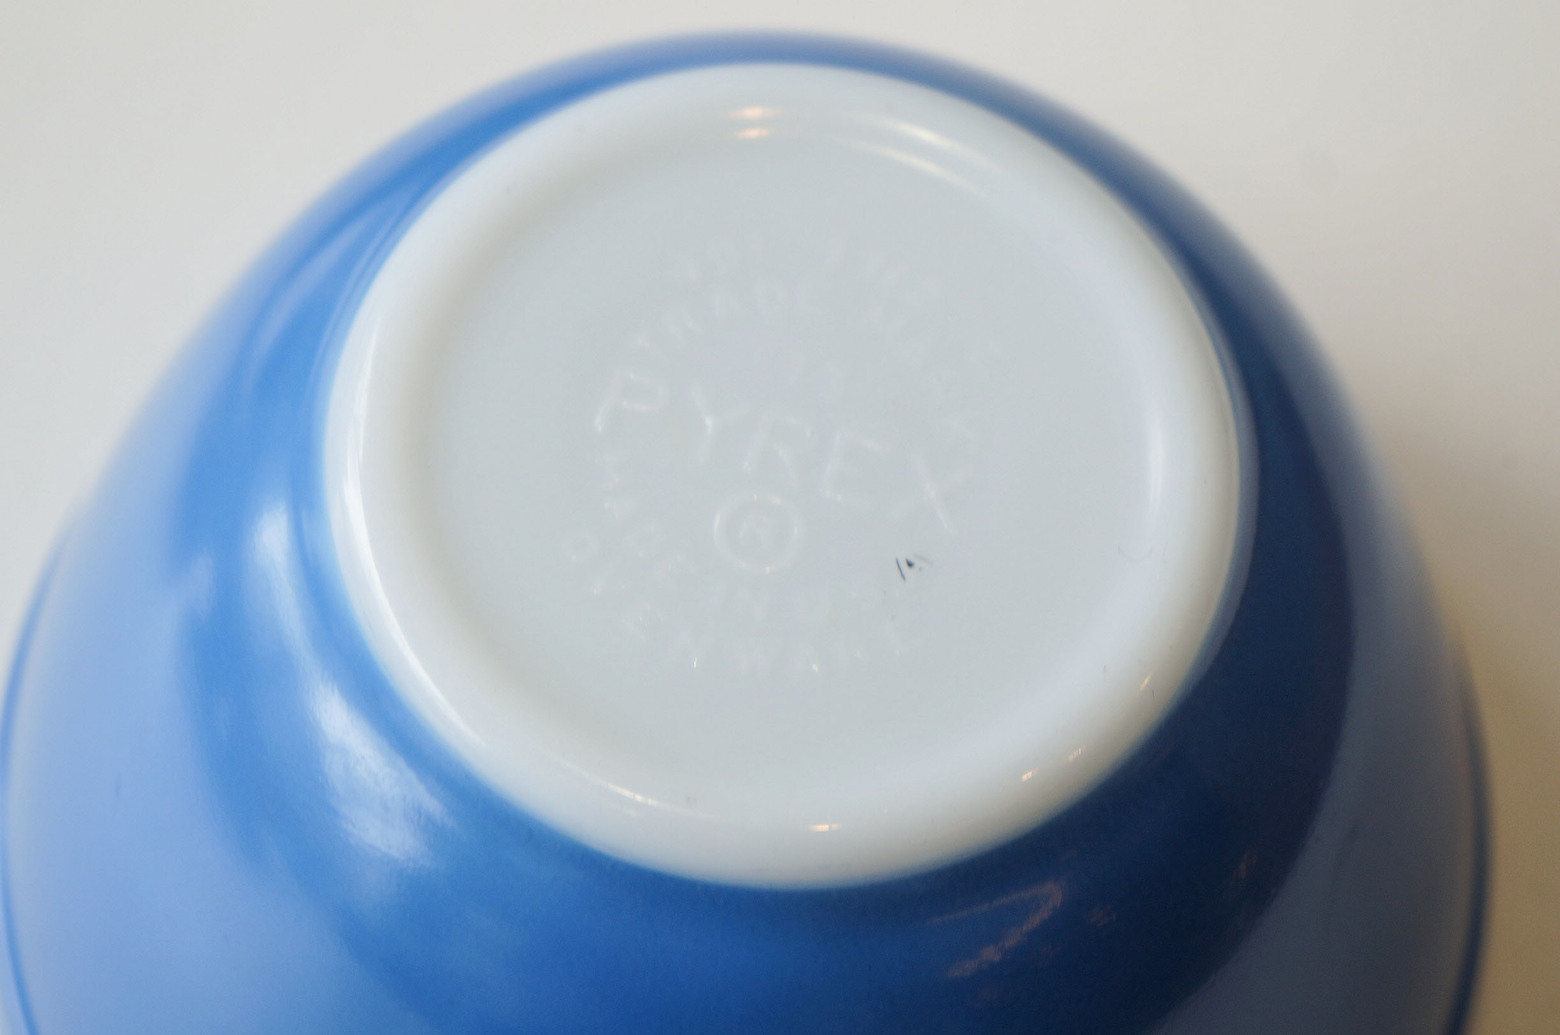 Old PYREX Mixing Bowl Primary Color Blue Ssize/オールドパイレックス ミキシングボウル アメリカヴィンテージ 食器 レトロ プライマリーカラー ブルー